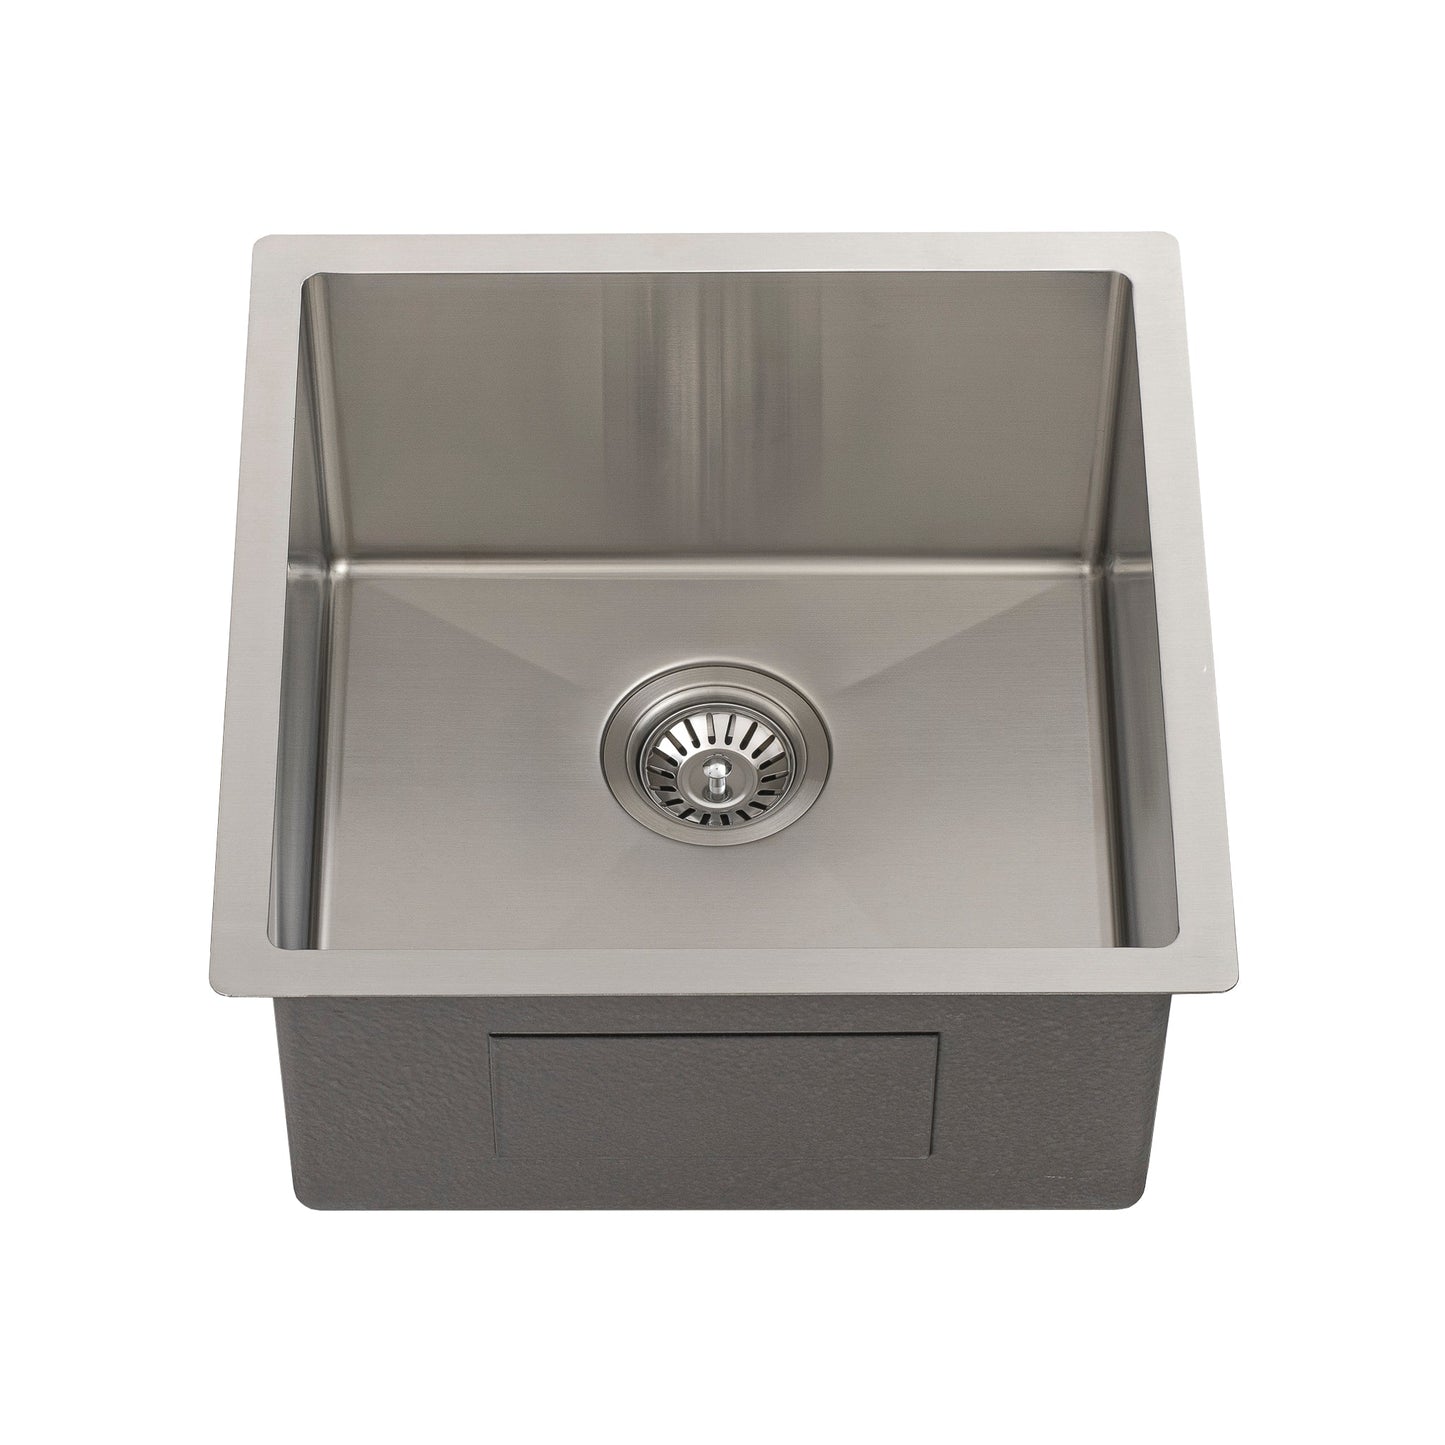 Retto II 450mm x 450mm x 230mm Stainless Steel Sink, Brushed Nickel Silver